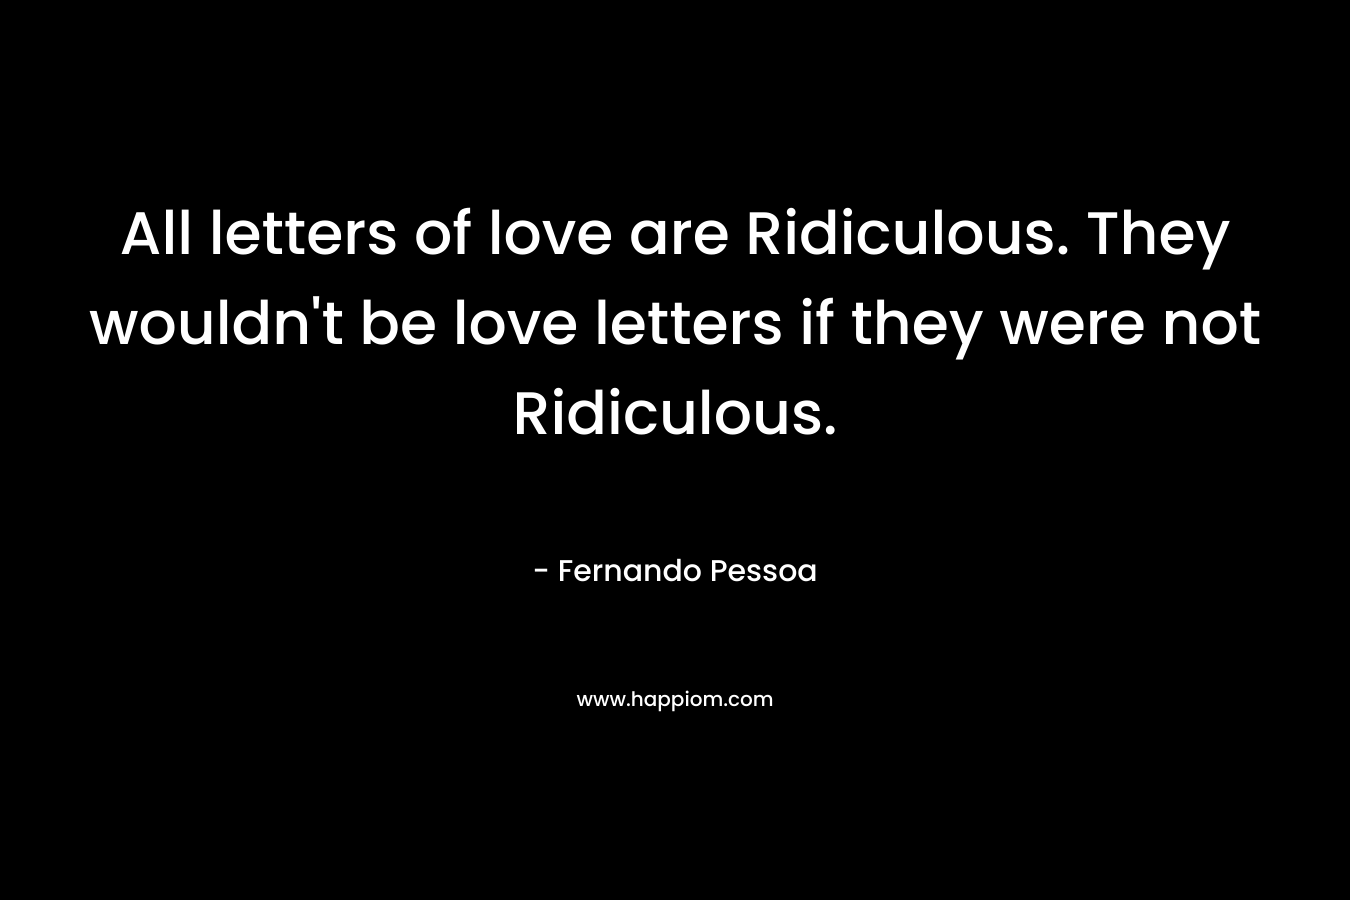 All letters of love are Ridiculous. They wouldn’t be love letters if they were not Ridiculous. – Fernando Pessoa